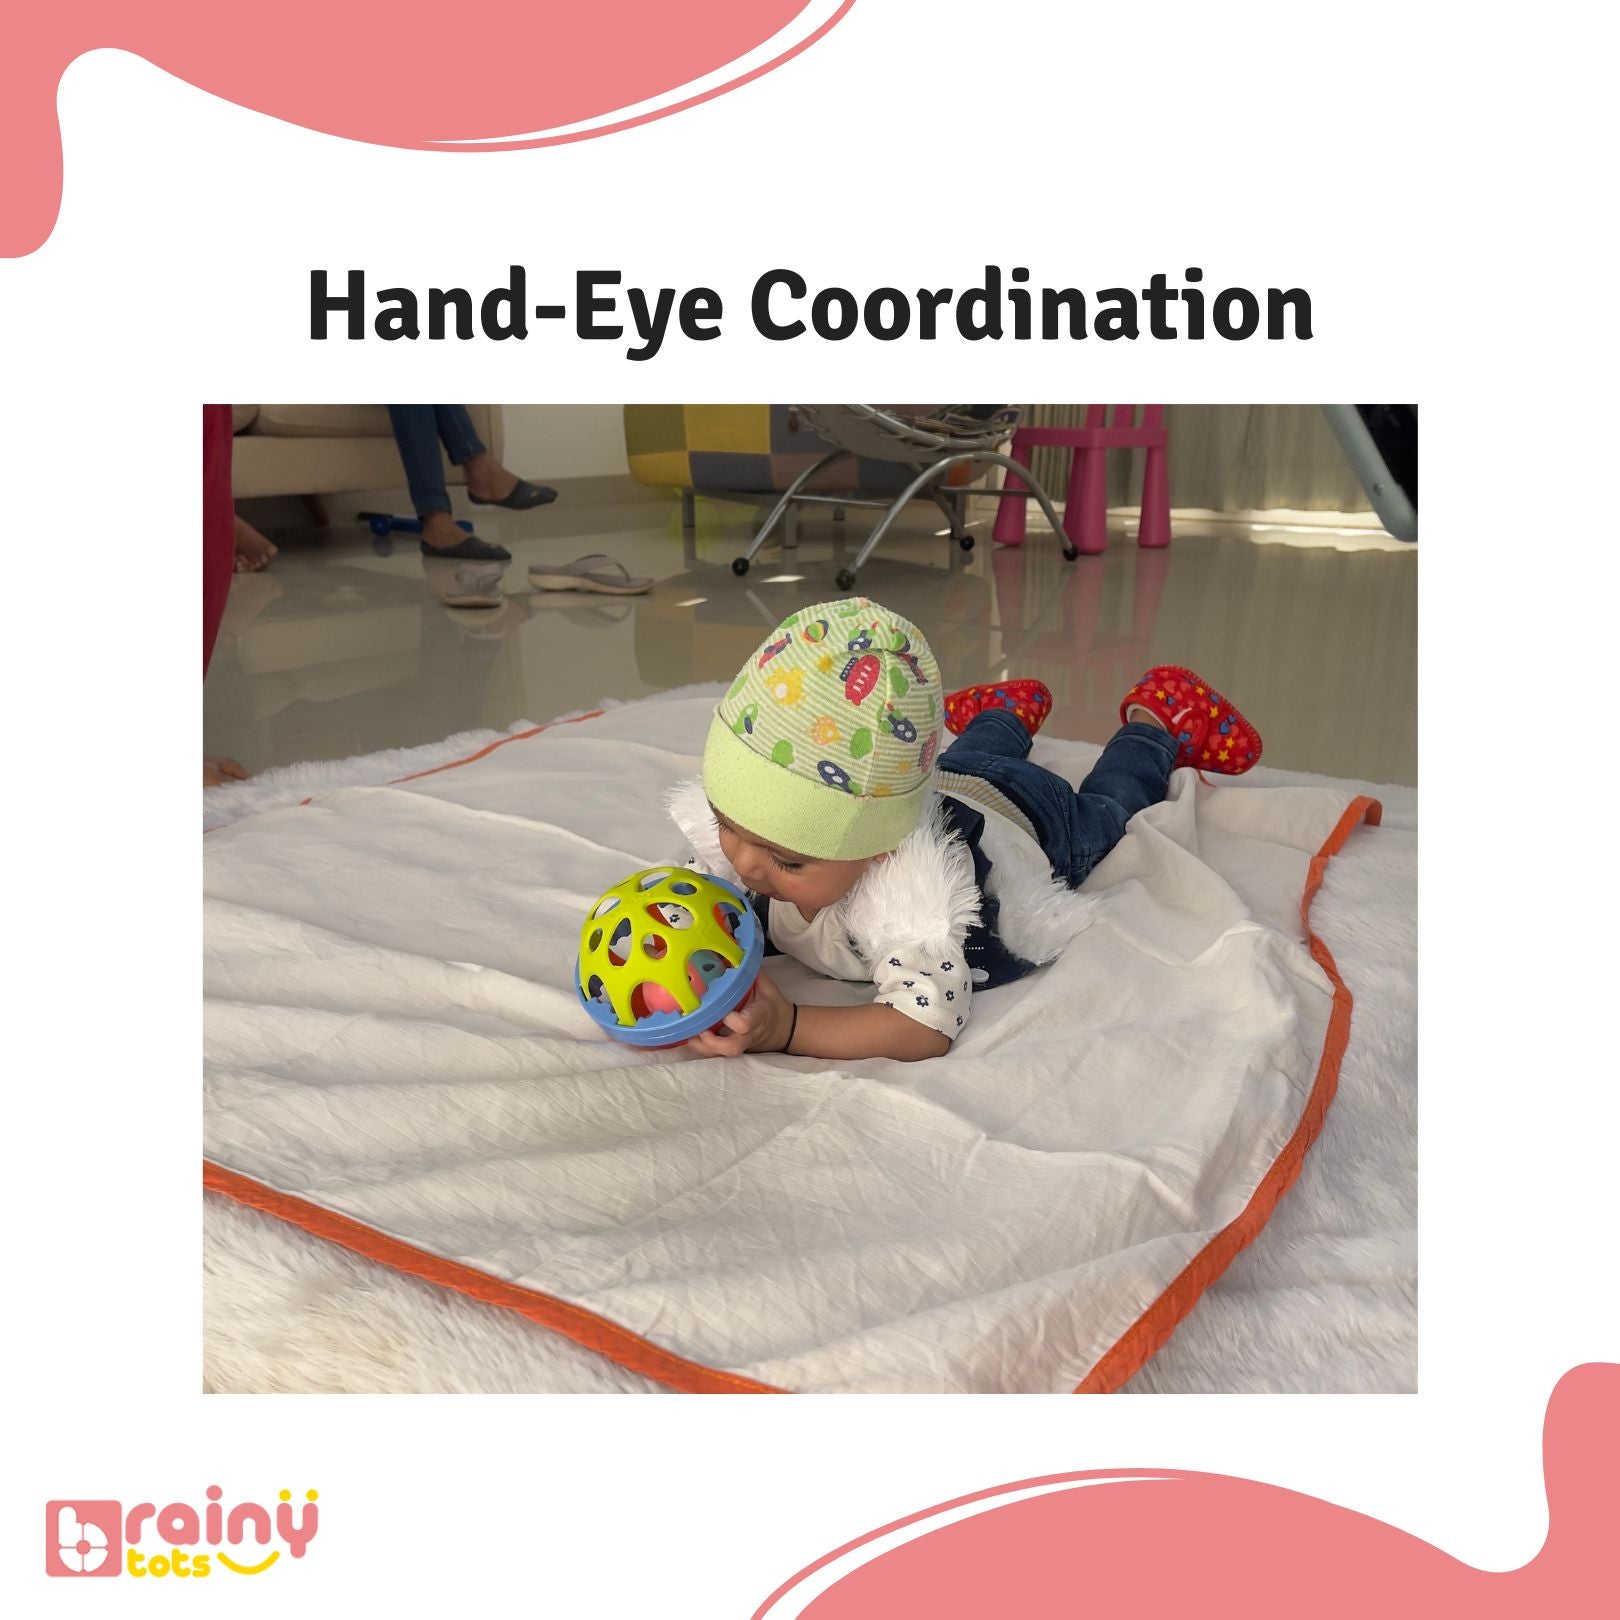 Enhance hand-eye coordination with our O Ball. Designed with dynamic shapes and easy-to-grasp features, this versatile toy encourages infants and toddlers to reach, grab, and manipulate, fostering the development of crucial hand-eye coordination skills essential for early childhood development.